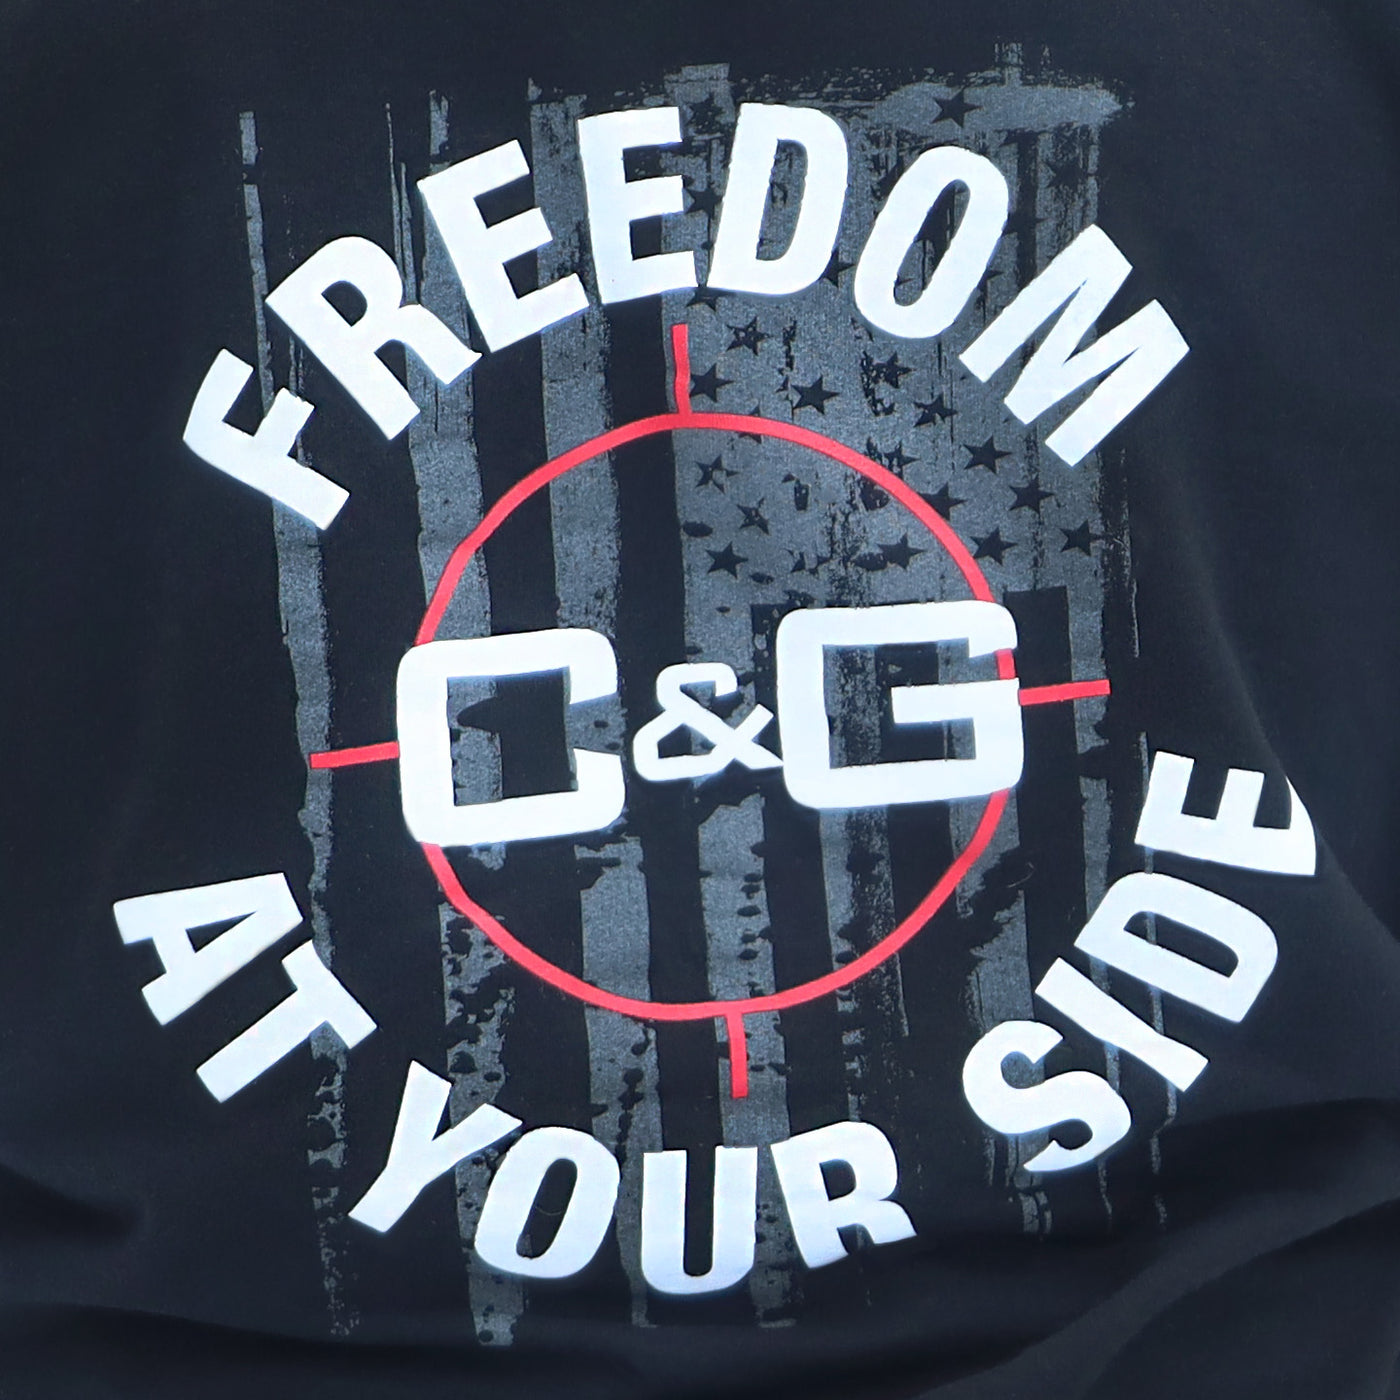 FREEDOM AT YOUR SIDE Hoodie | APPAREL | C&G Holsters